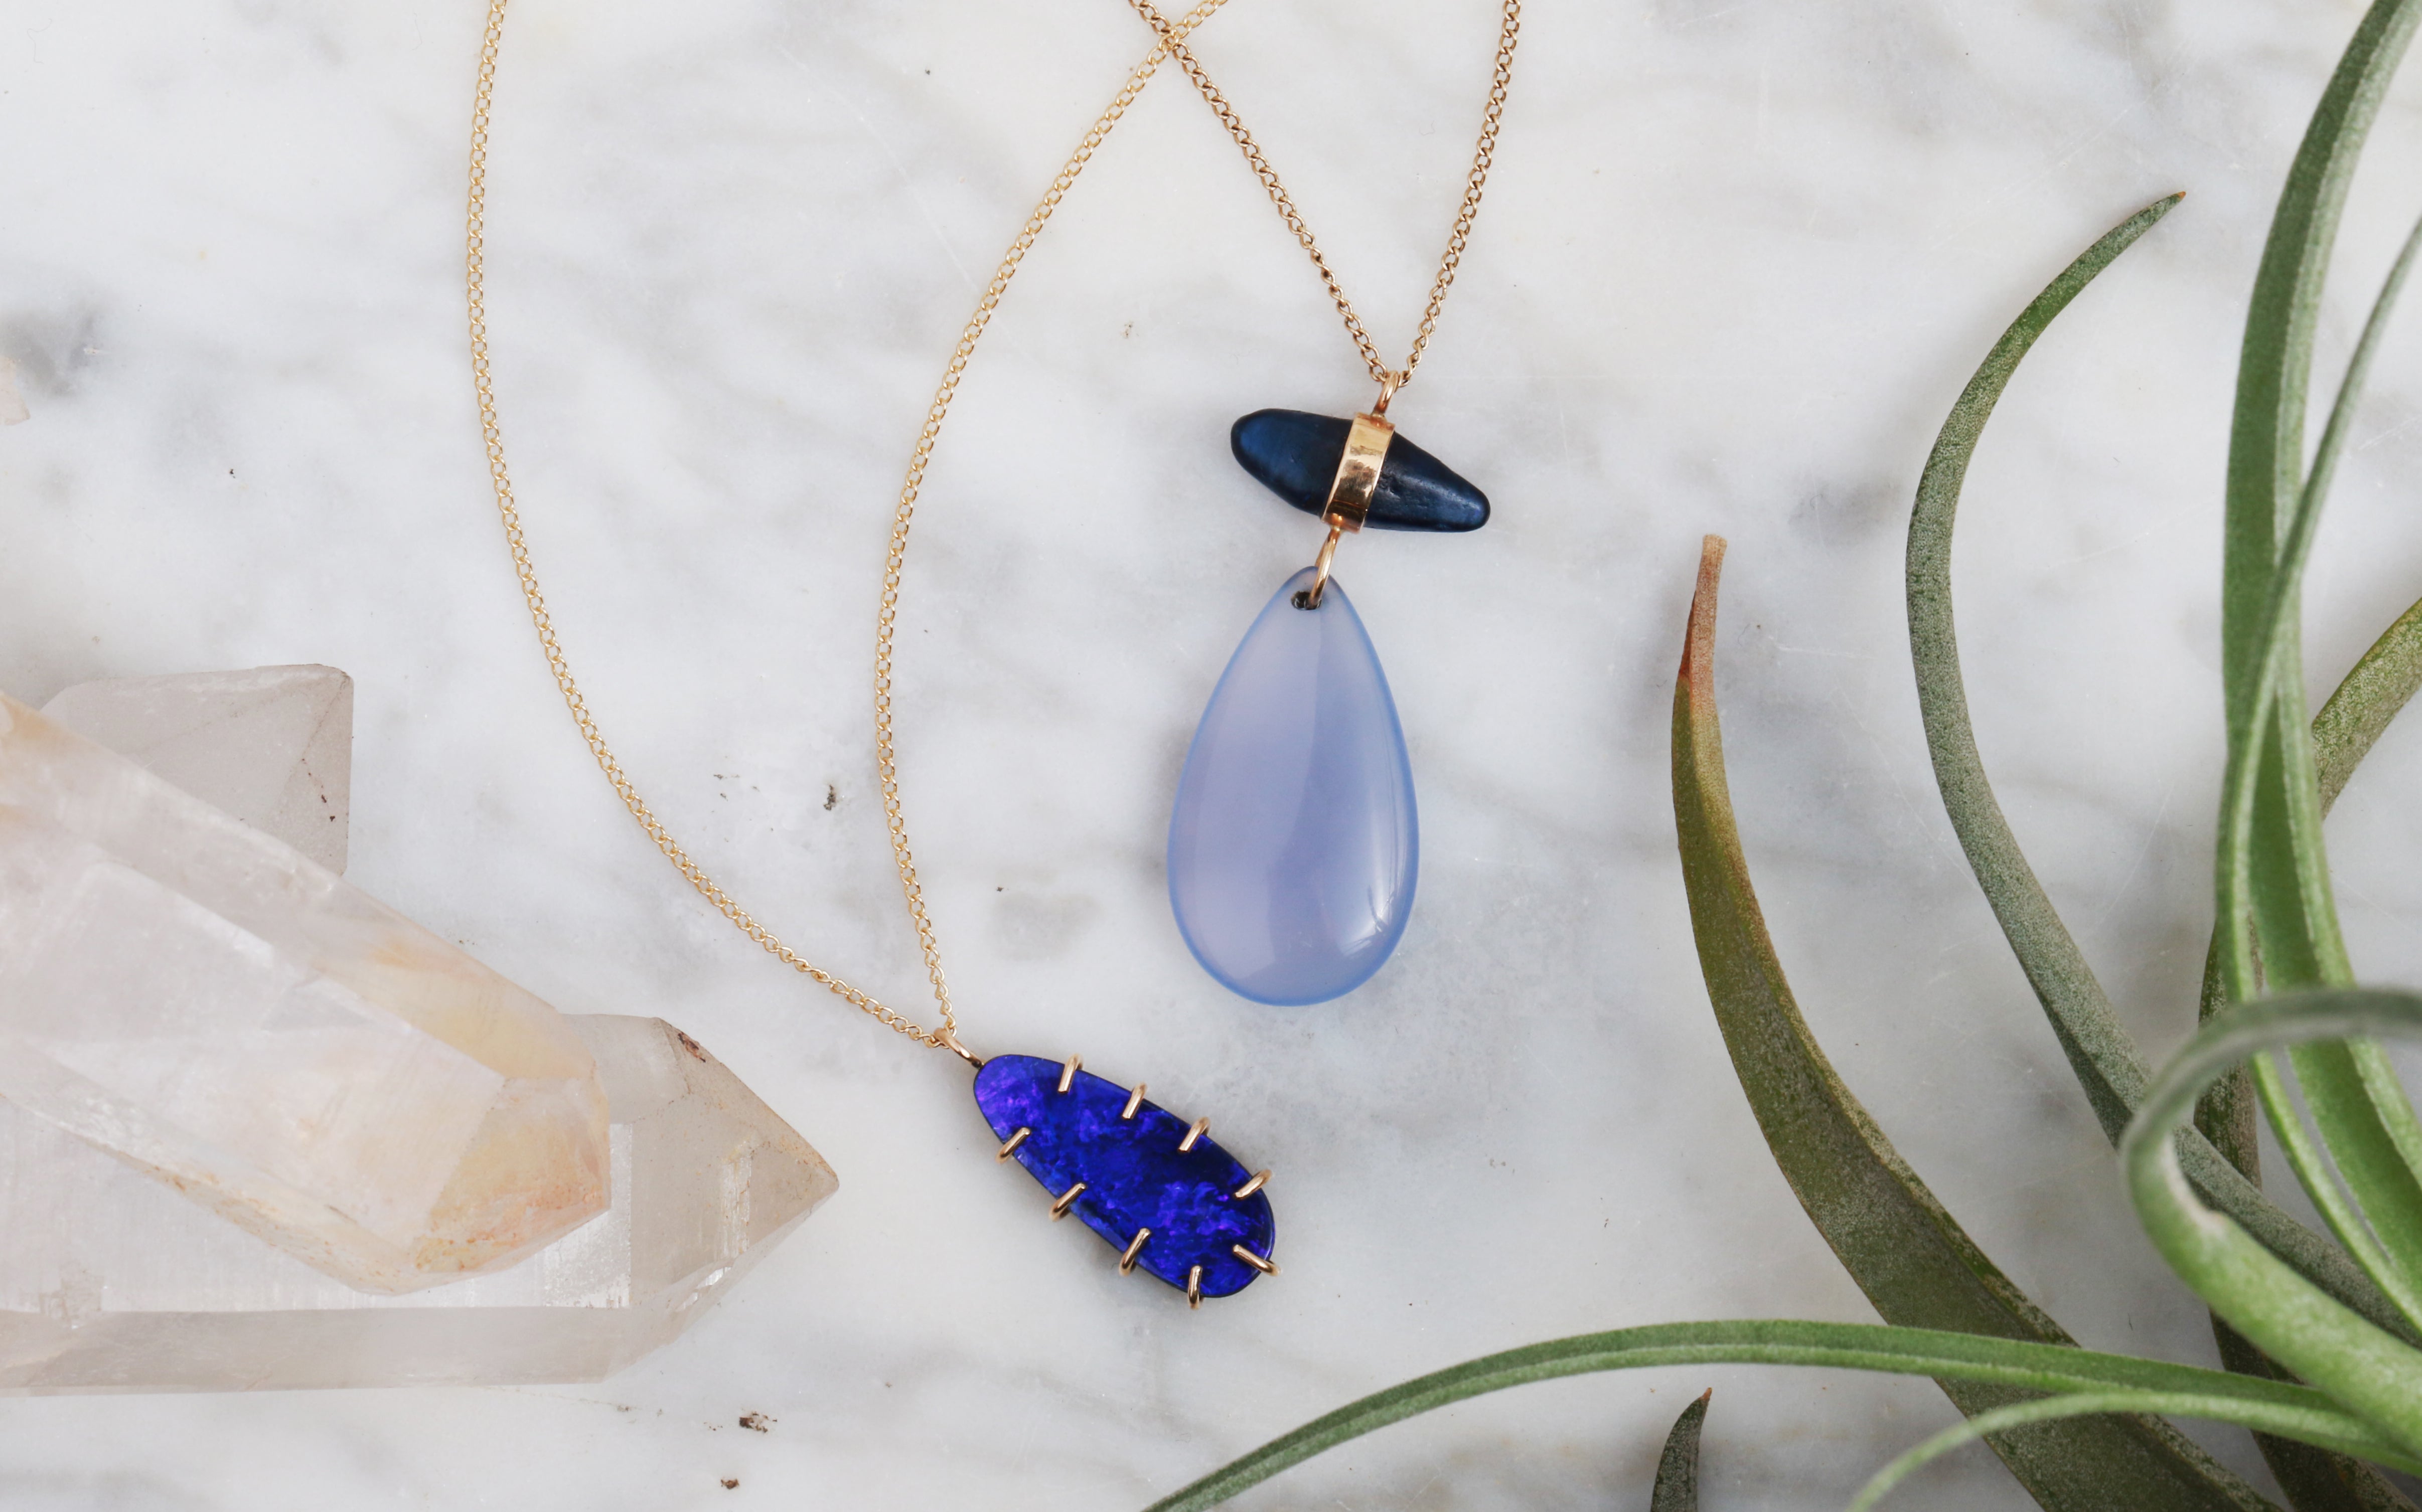 blue opal, sapphire, and chalcedony necklaces